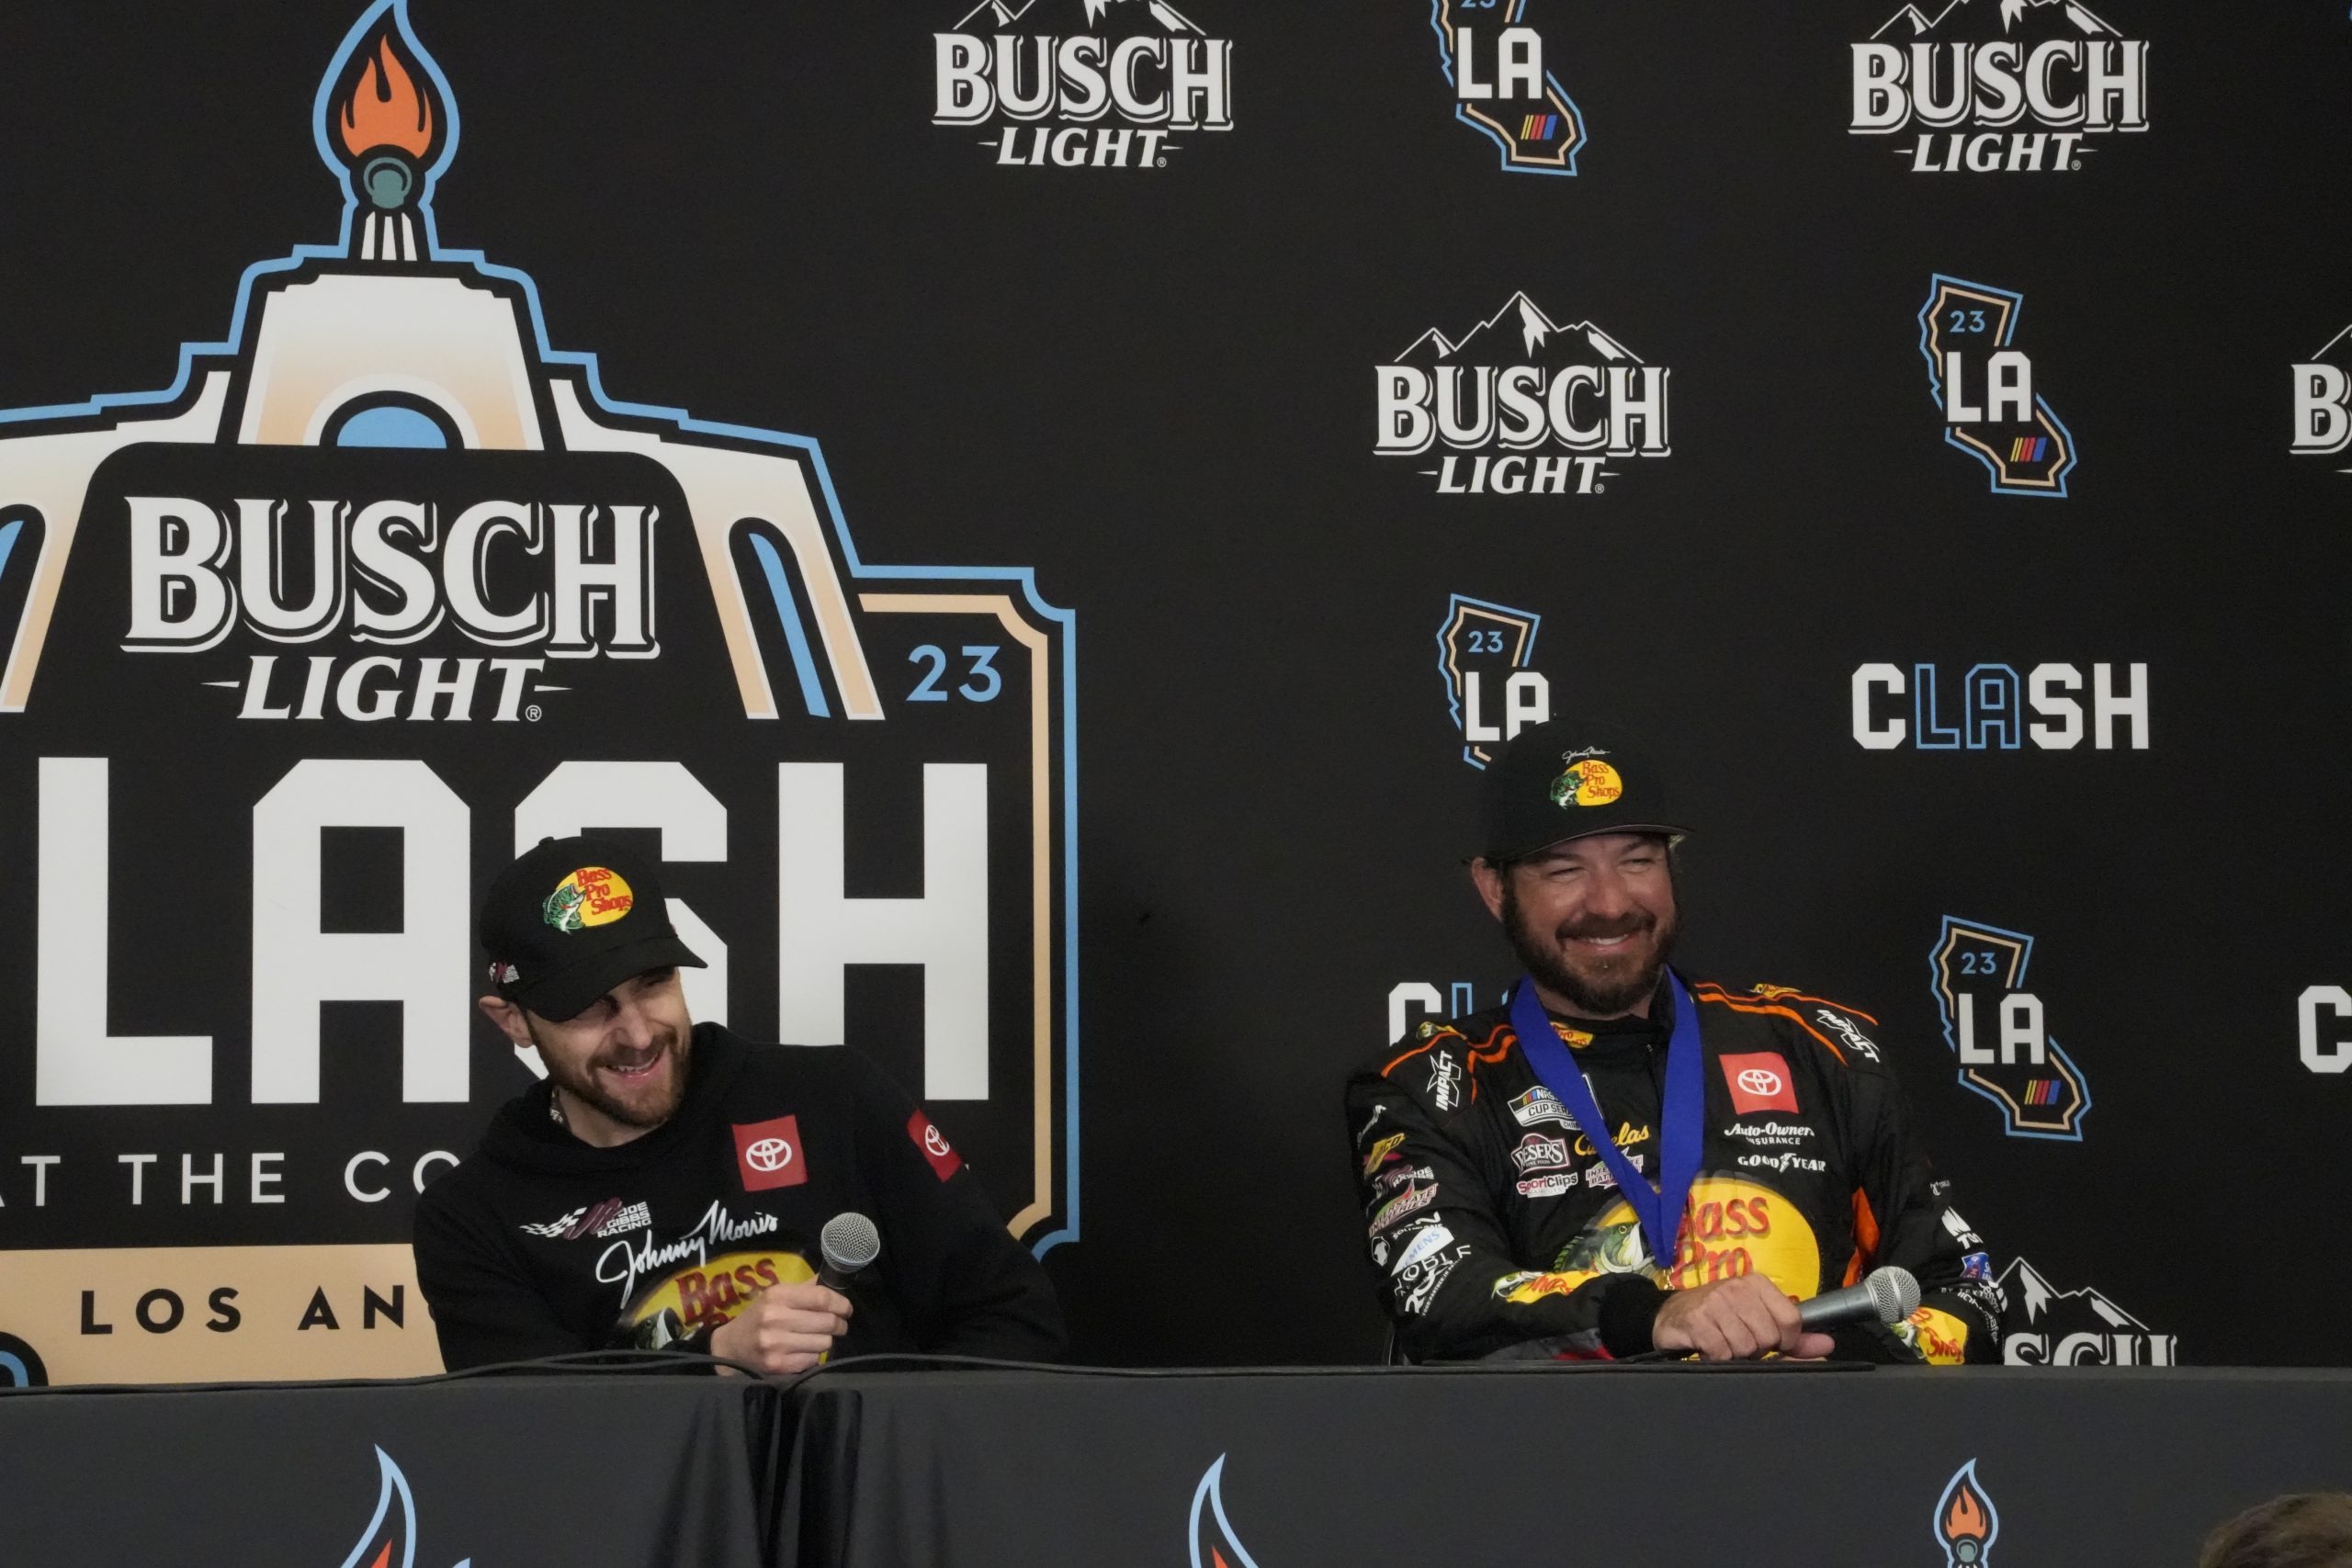 No problem, big or small, stopped Martin Truex Jr. and James Small from returning to their winning ways. (Photo: Christopher Vargas | The Podium Finish)